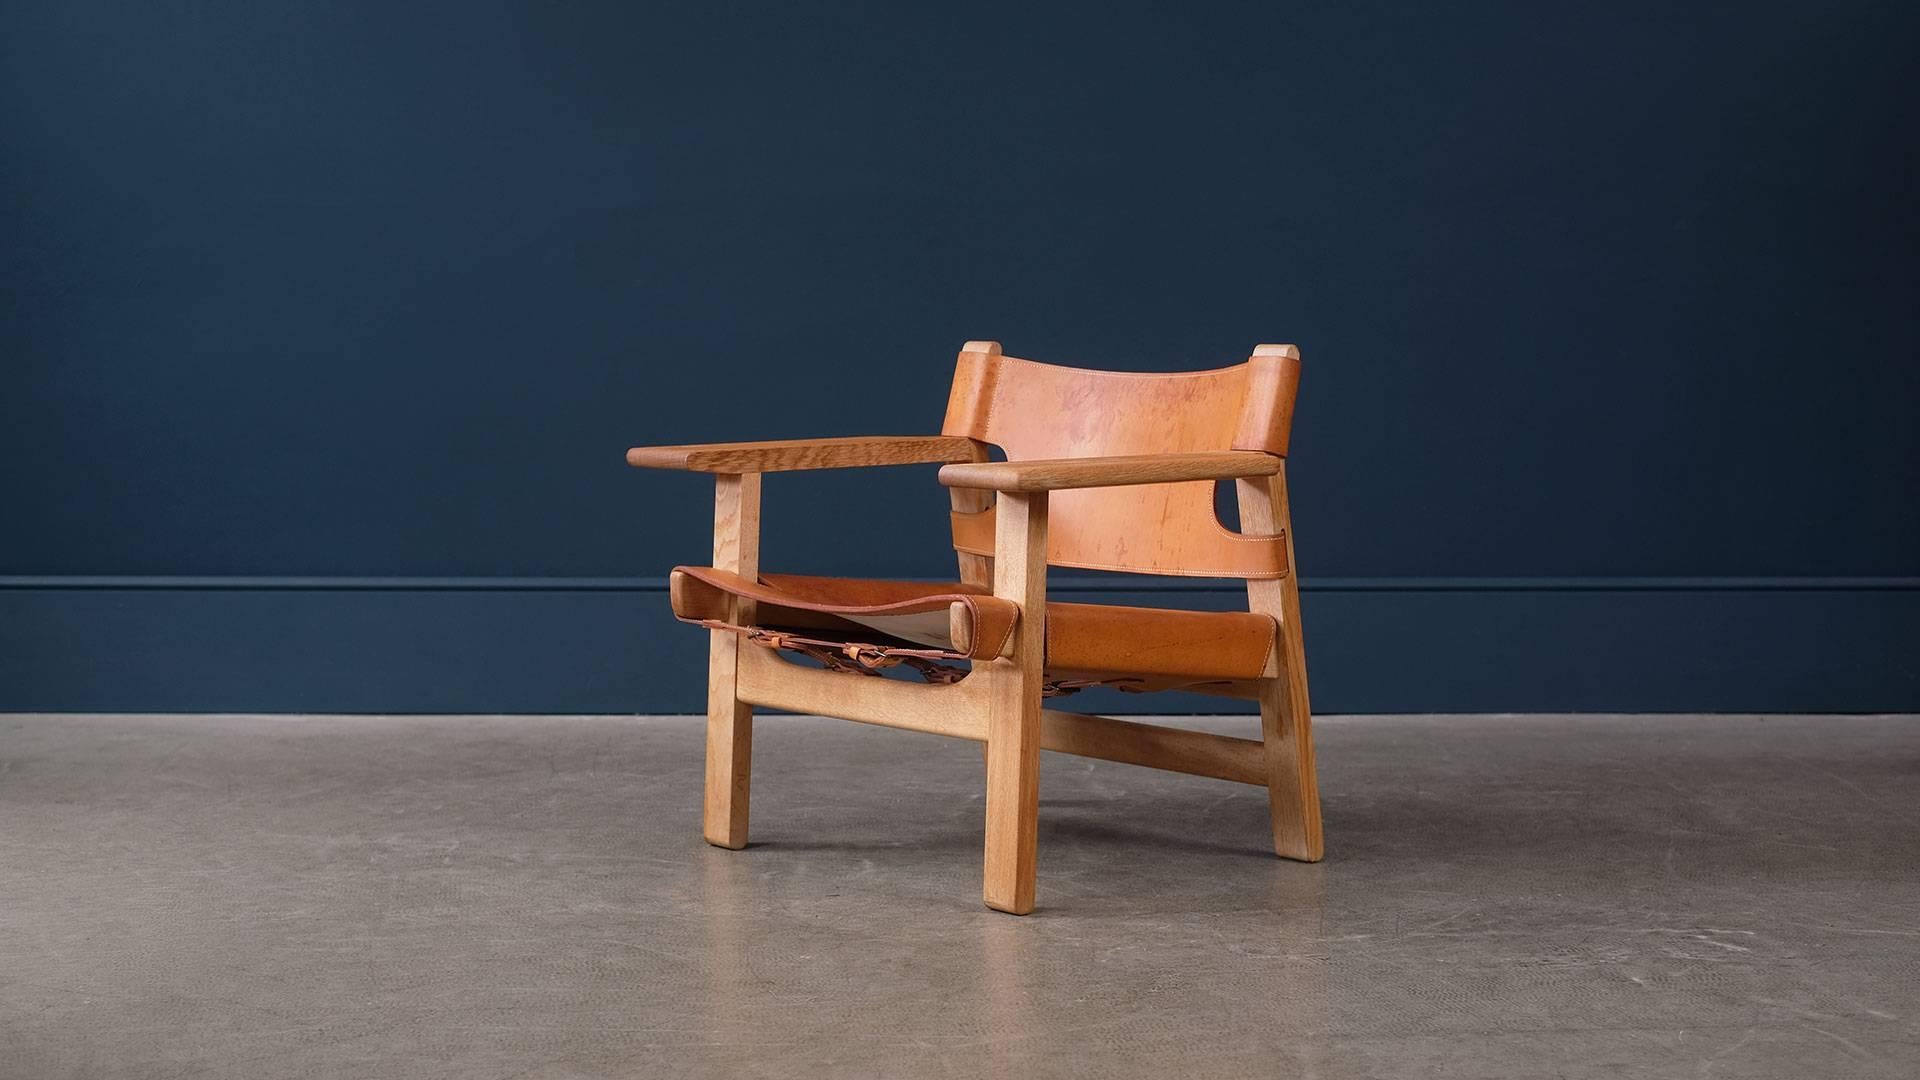 Fantastic Spanish chair designed by Børge Mogensen for Fredericia, Denmark. Wonderful example with exceptional figured solid oak frame and lovely patina to the cognac colored saddle leather seat and back.